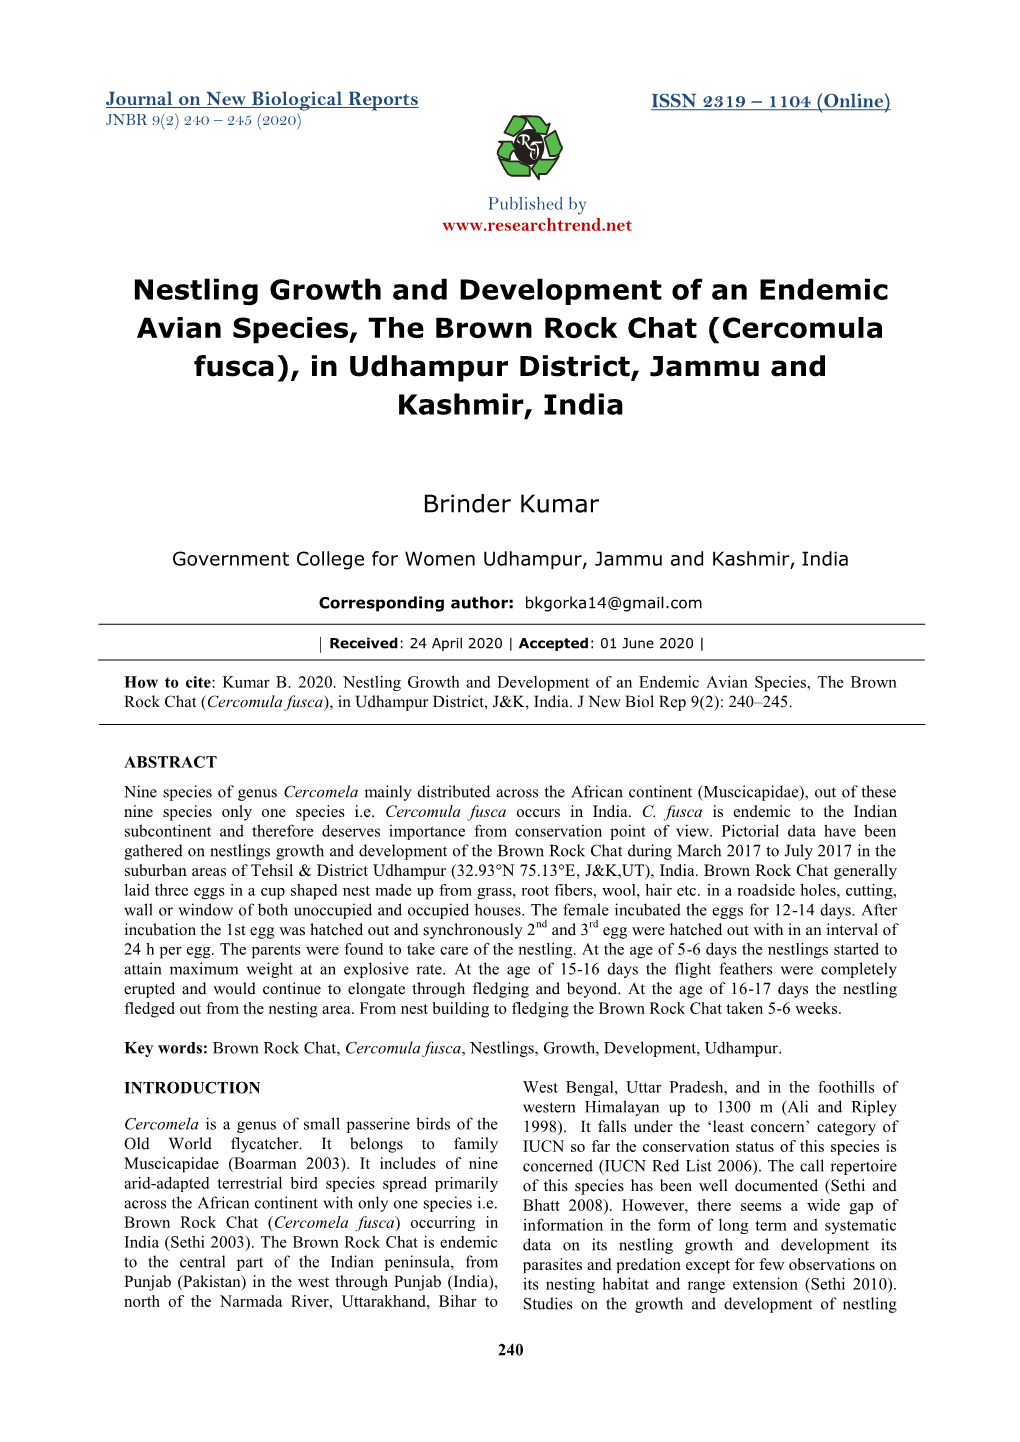 Nestling Growth and Development of an Endemic Avian Species, the Brown Rock Chat (Cercomula Fusca), in Udhampur District, Jammu and Kashmir, India